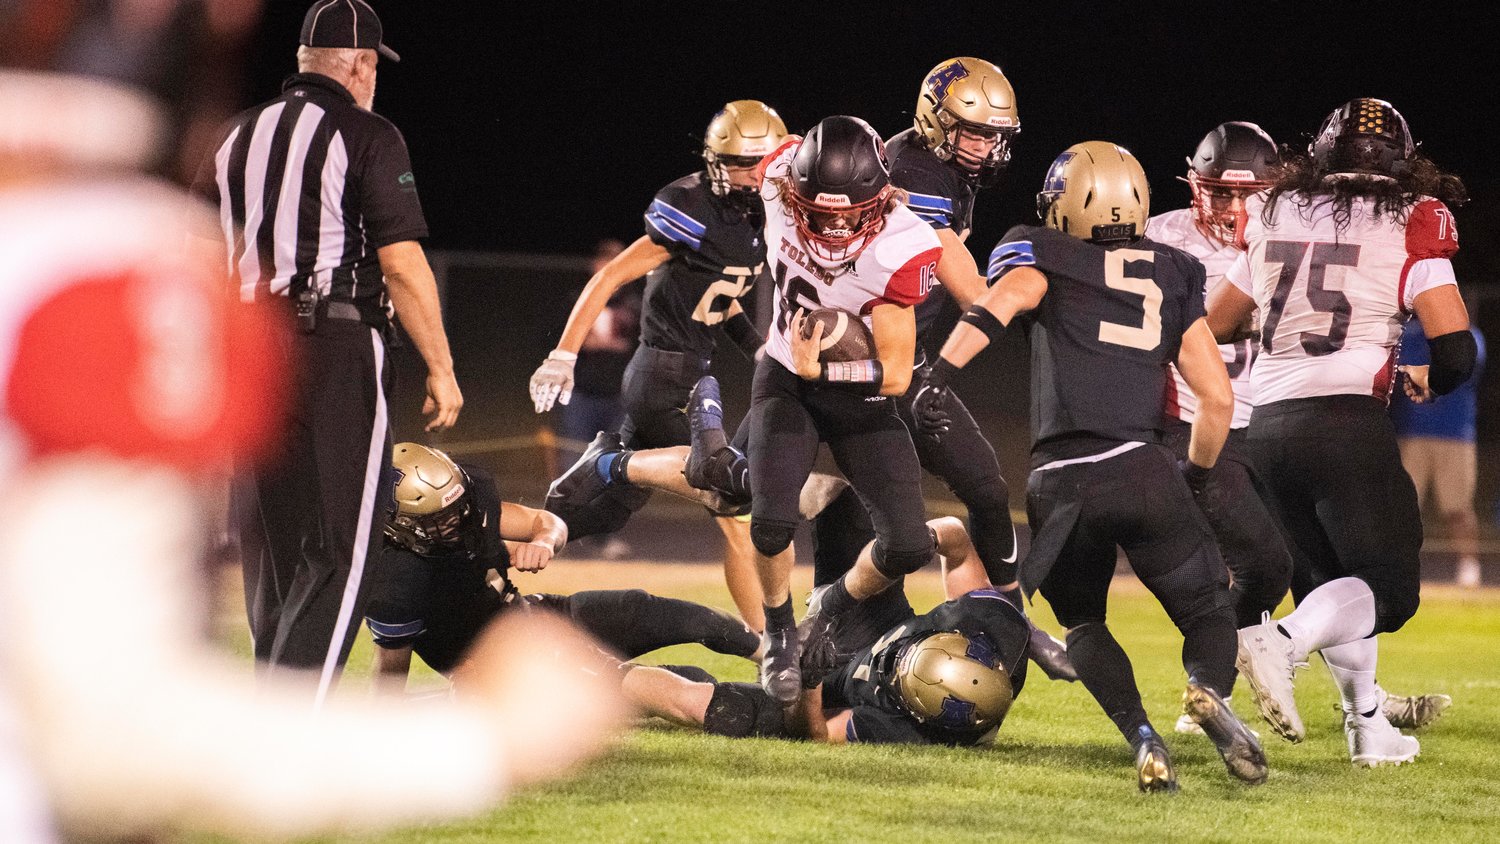 Toledo senior Zane Ranney (16) plows through defenders with the football Friday night in Adna.